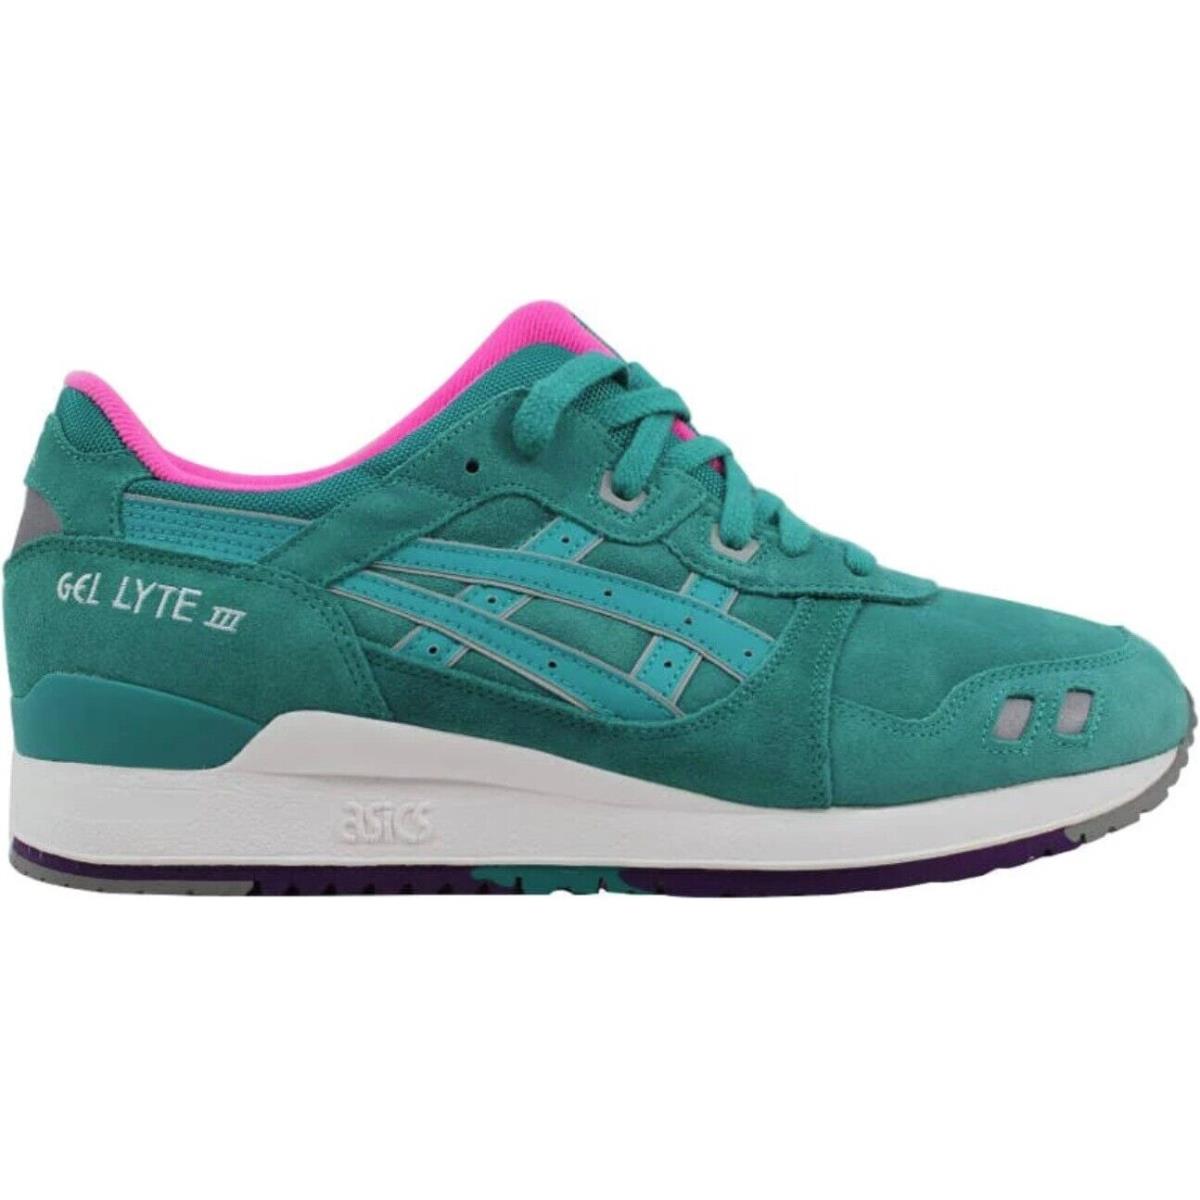 Asics Men`s Gel-lyte Iii Tropical Green All Weather Pac Sports Style Shoe Sz. 11 - Tropical Green